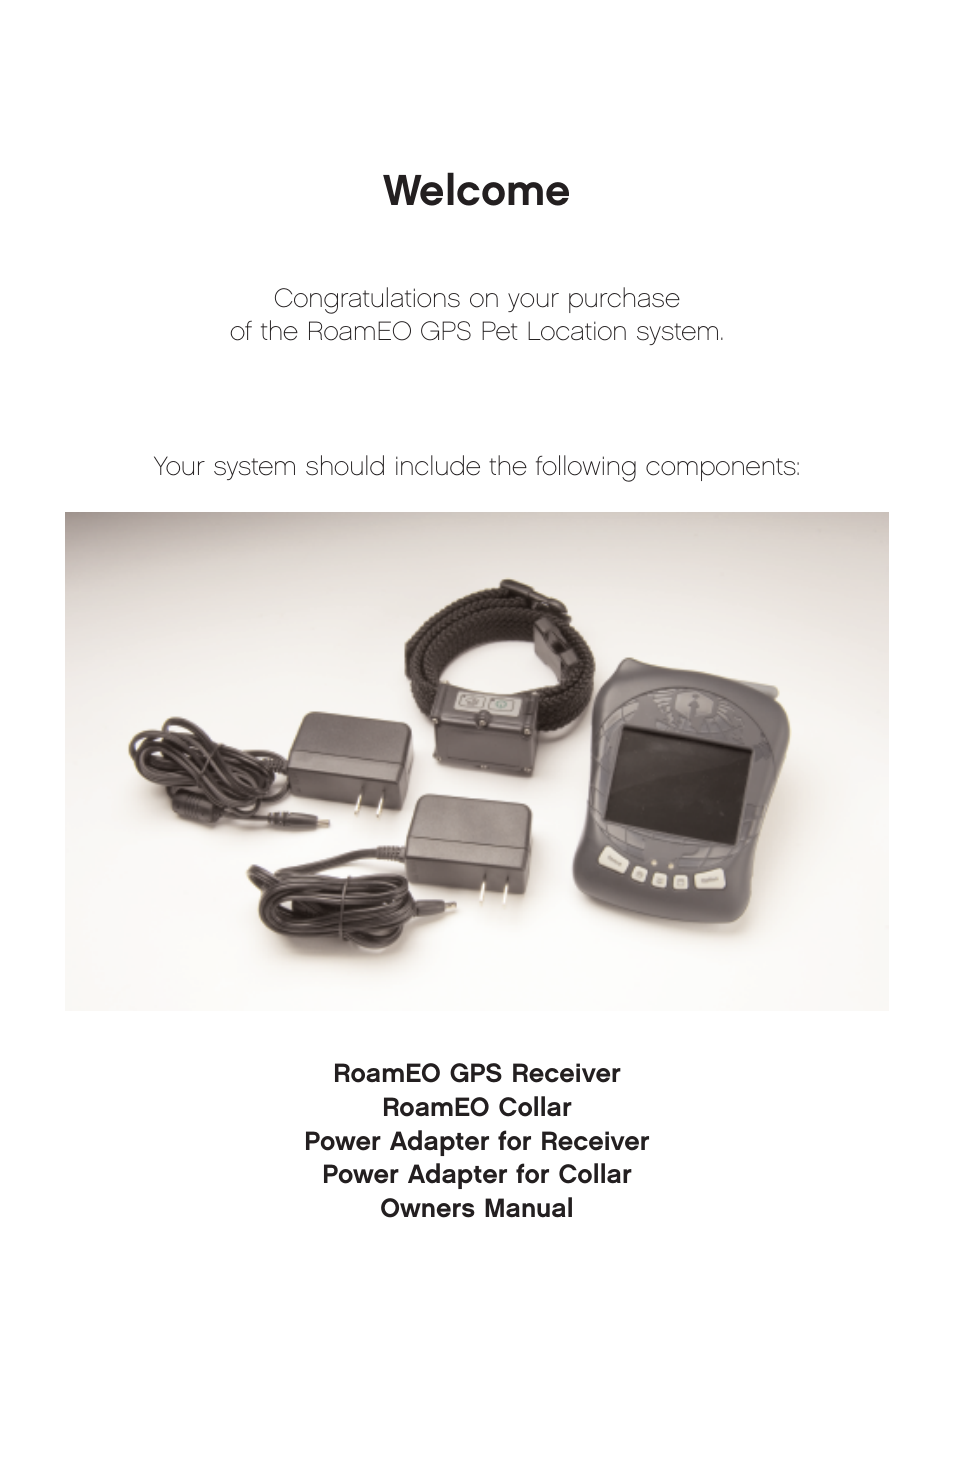 Welcome | White Bear Technologies RoamEO GPS Pet Location System User Manual | Page 3 / 36